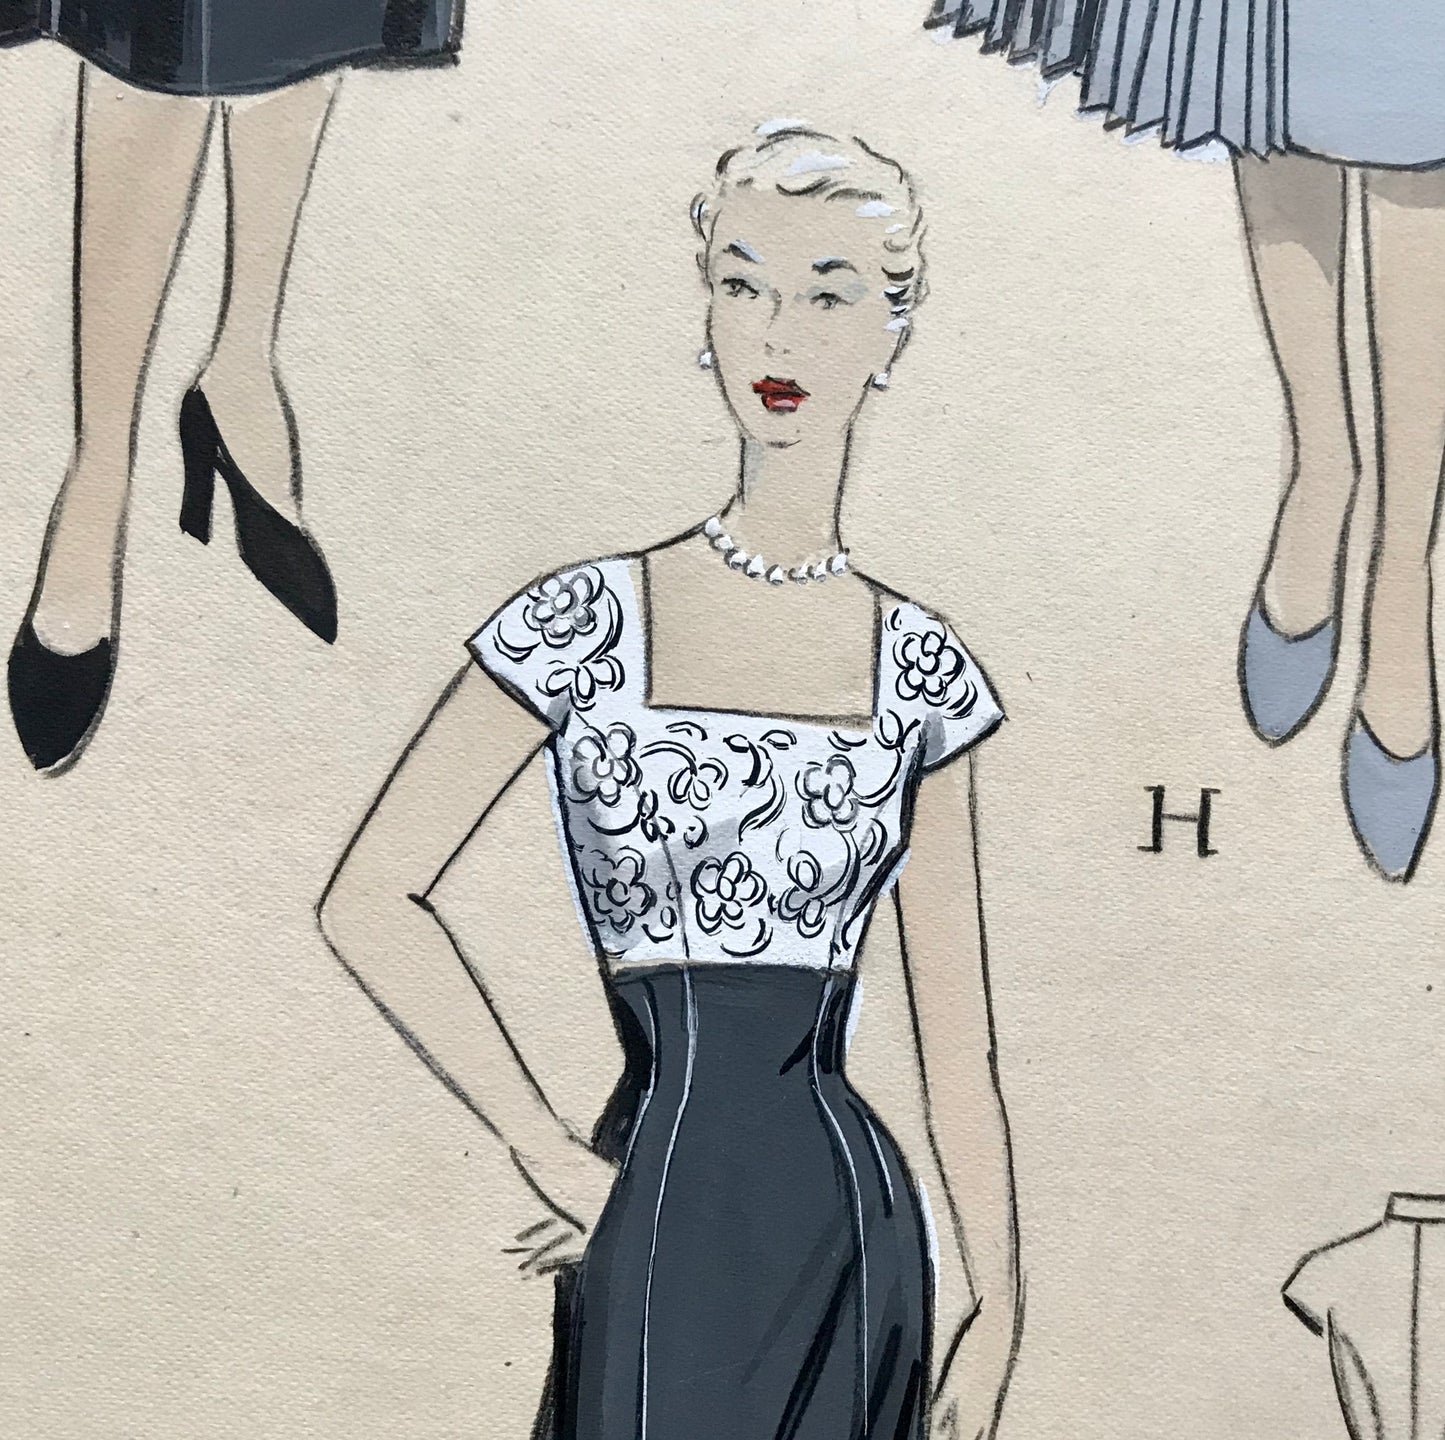 A Large Hand Drawn and Hand Painted Fashion Illustration. From Barcelona, Spain. 1955. Size: 50.5 x 40.5 cms.